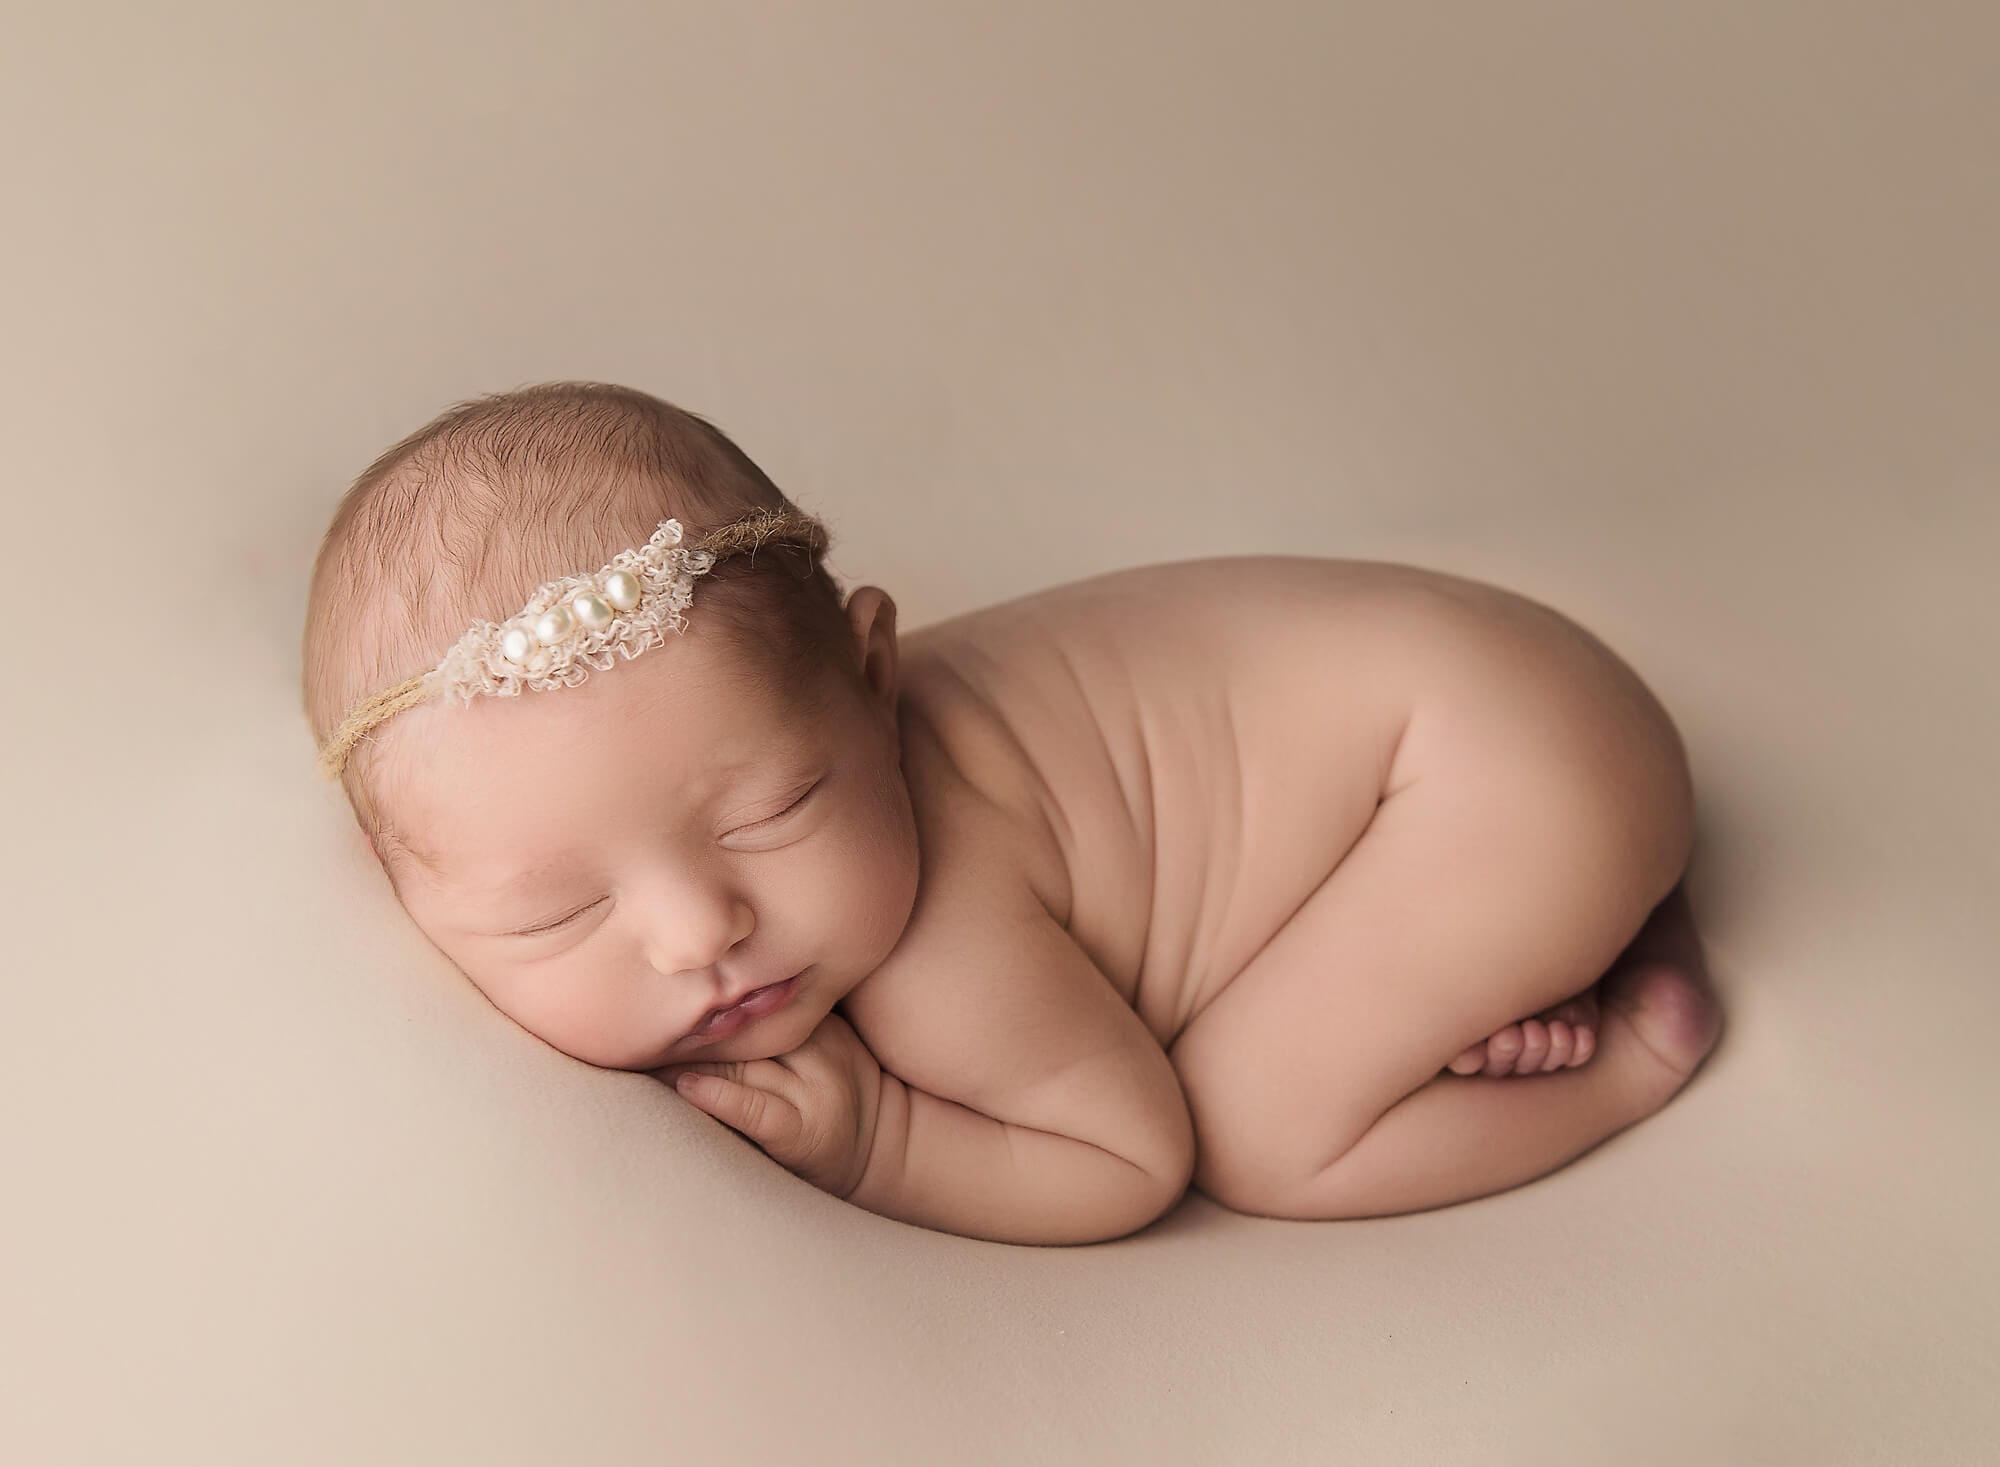 The newborn baby with a dainty headband is lying on a tummy curled up on a beige background in the studio. 